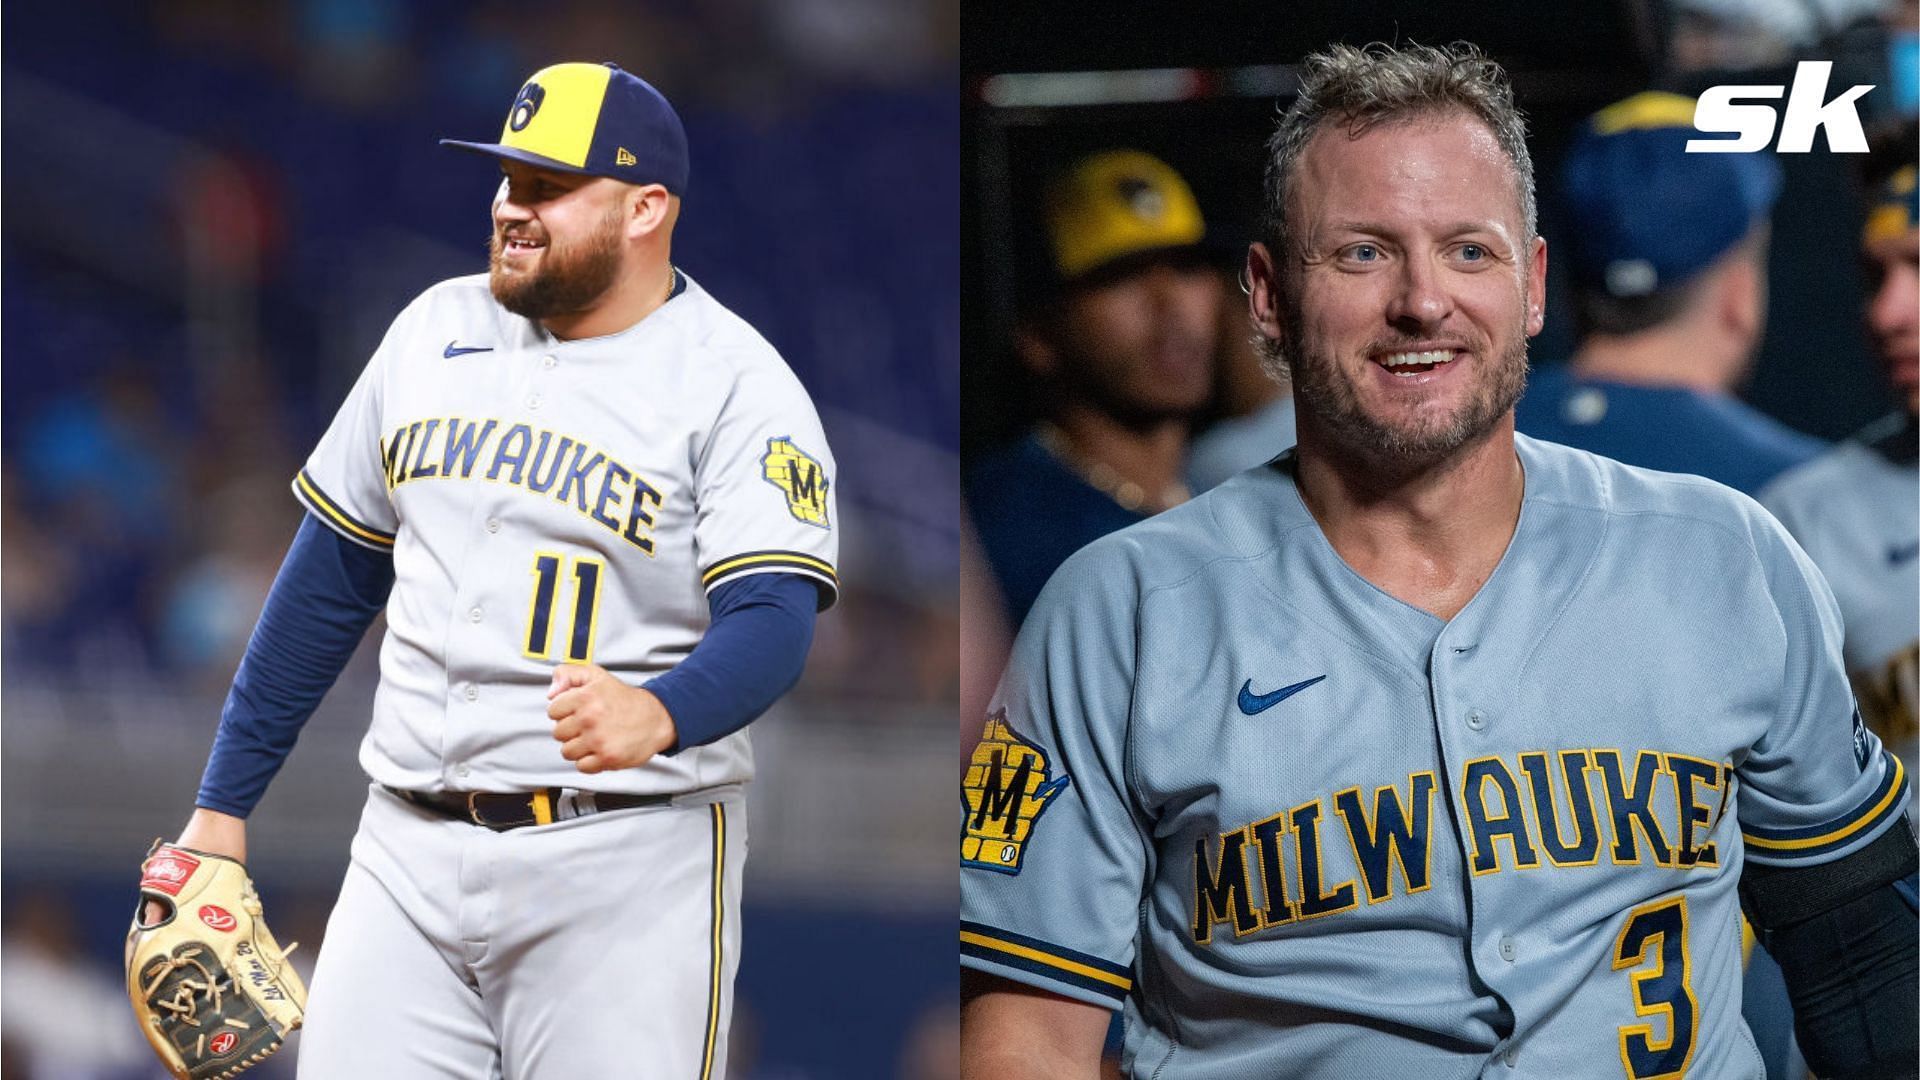 Rowdy Tellez shared a story about Josh Donaldson refusing to introduce himself to teammates when he arrived in Milwaukee